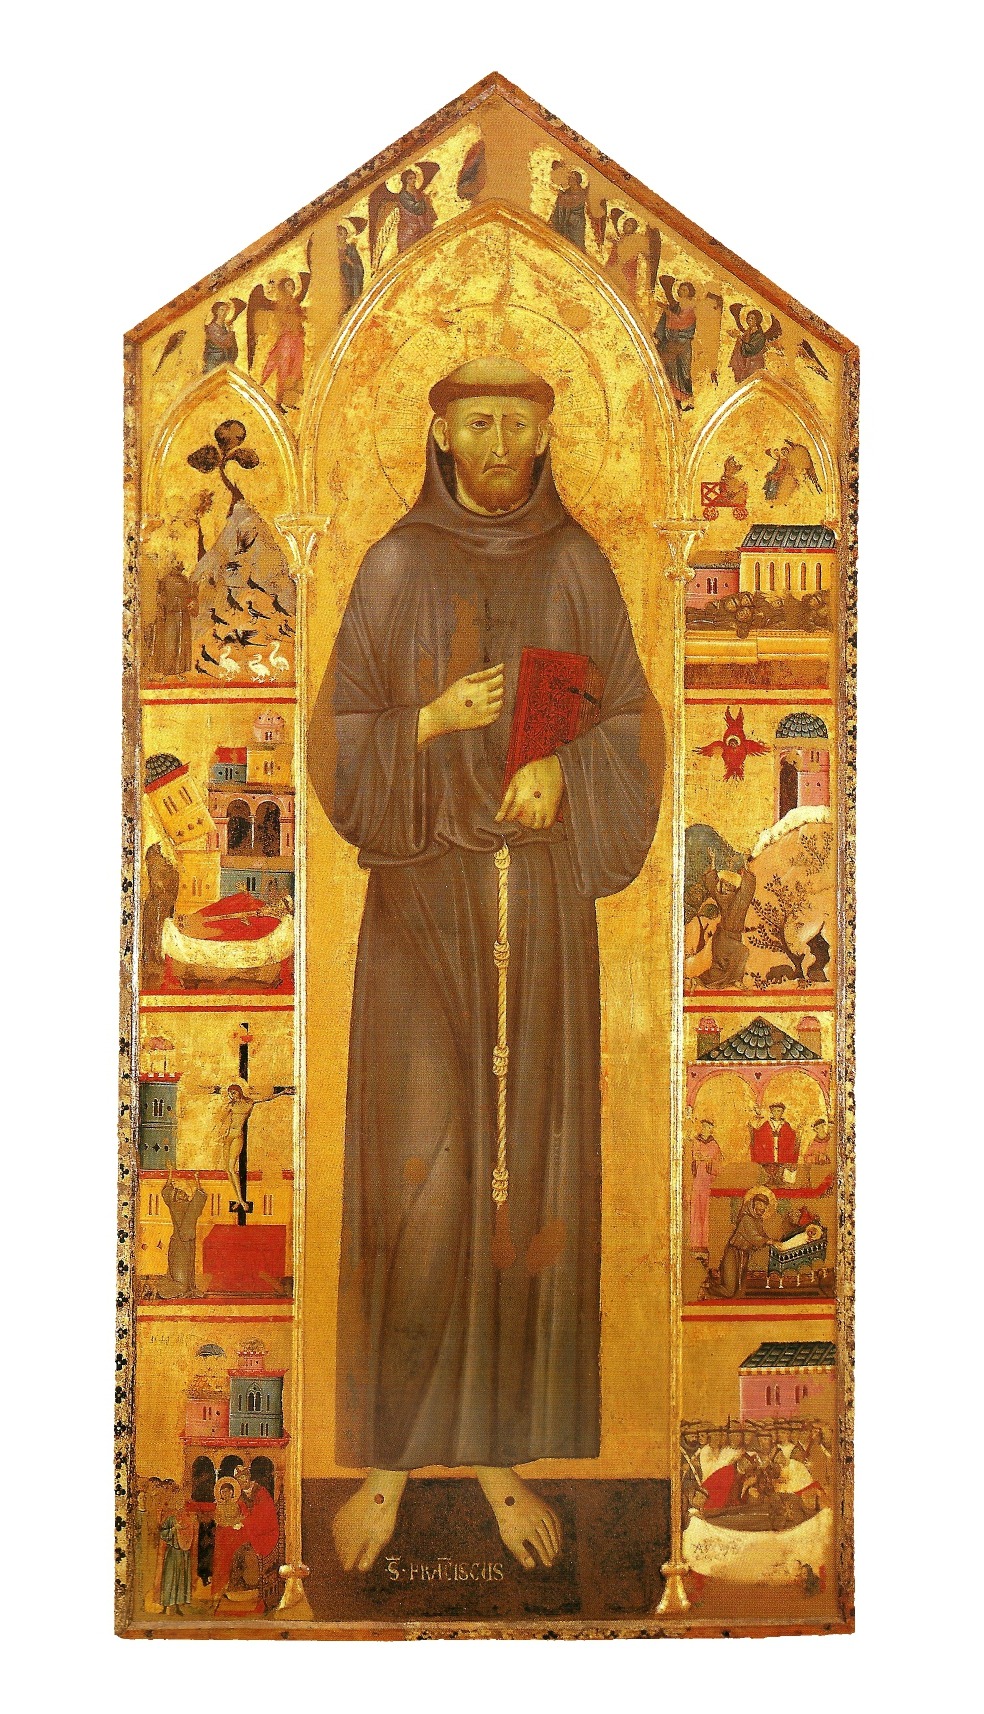 Guido di Graziano, Saint Francis and Stories from His Life (after 1270; tempera and gold on panel; Siena, Pinacoteca Nazionale)